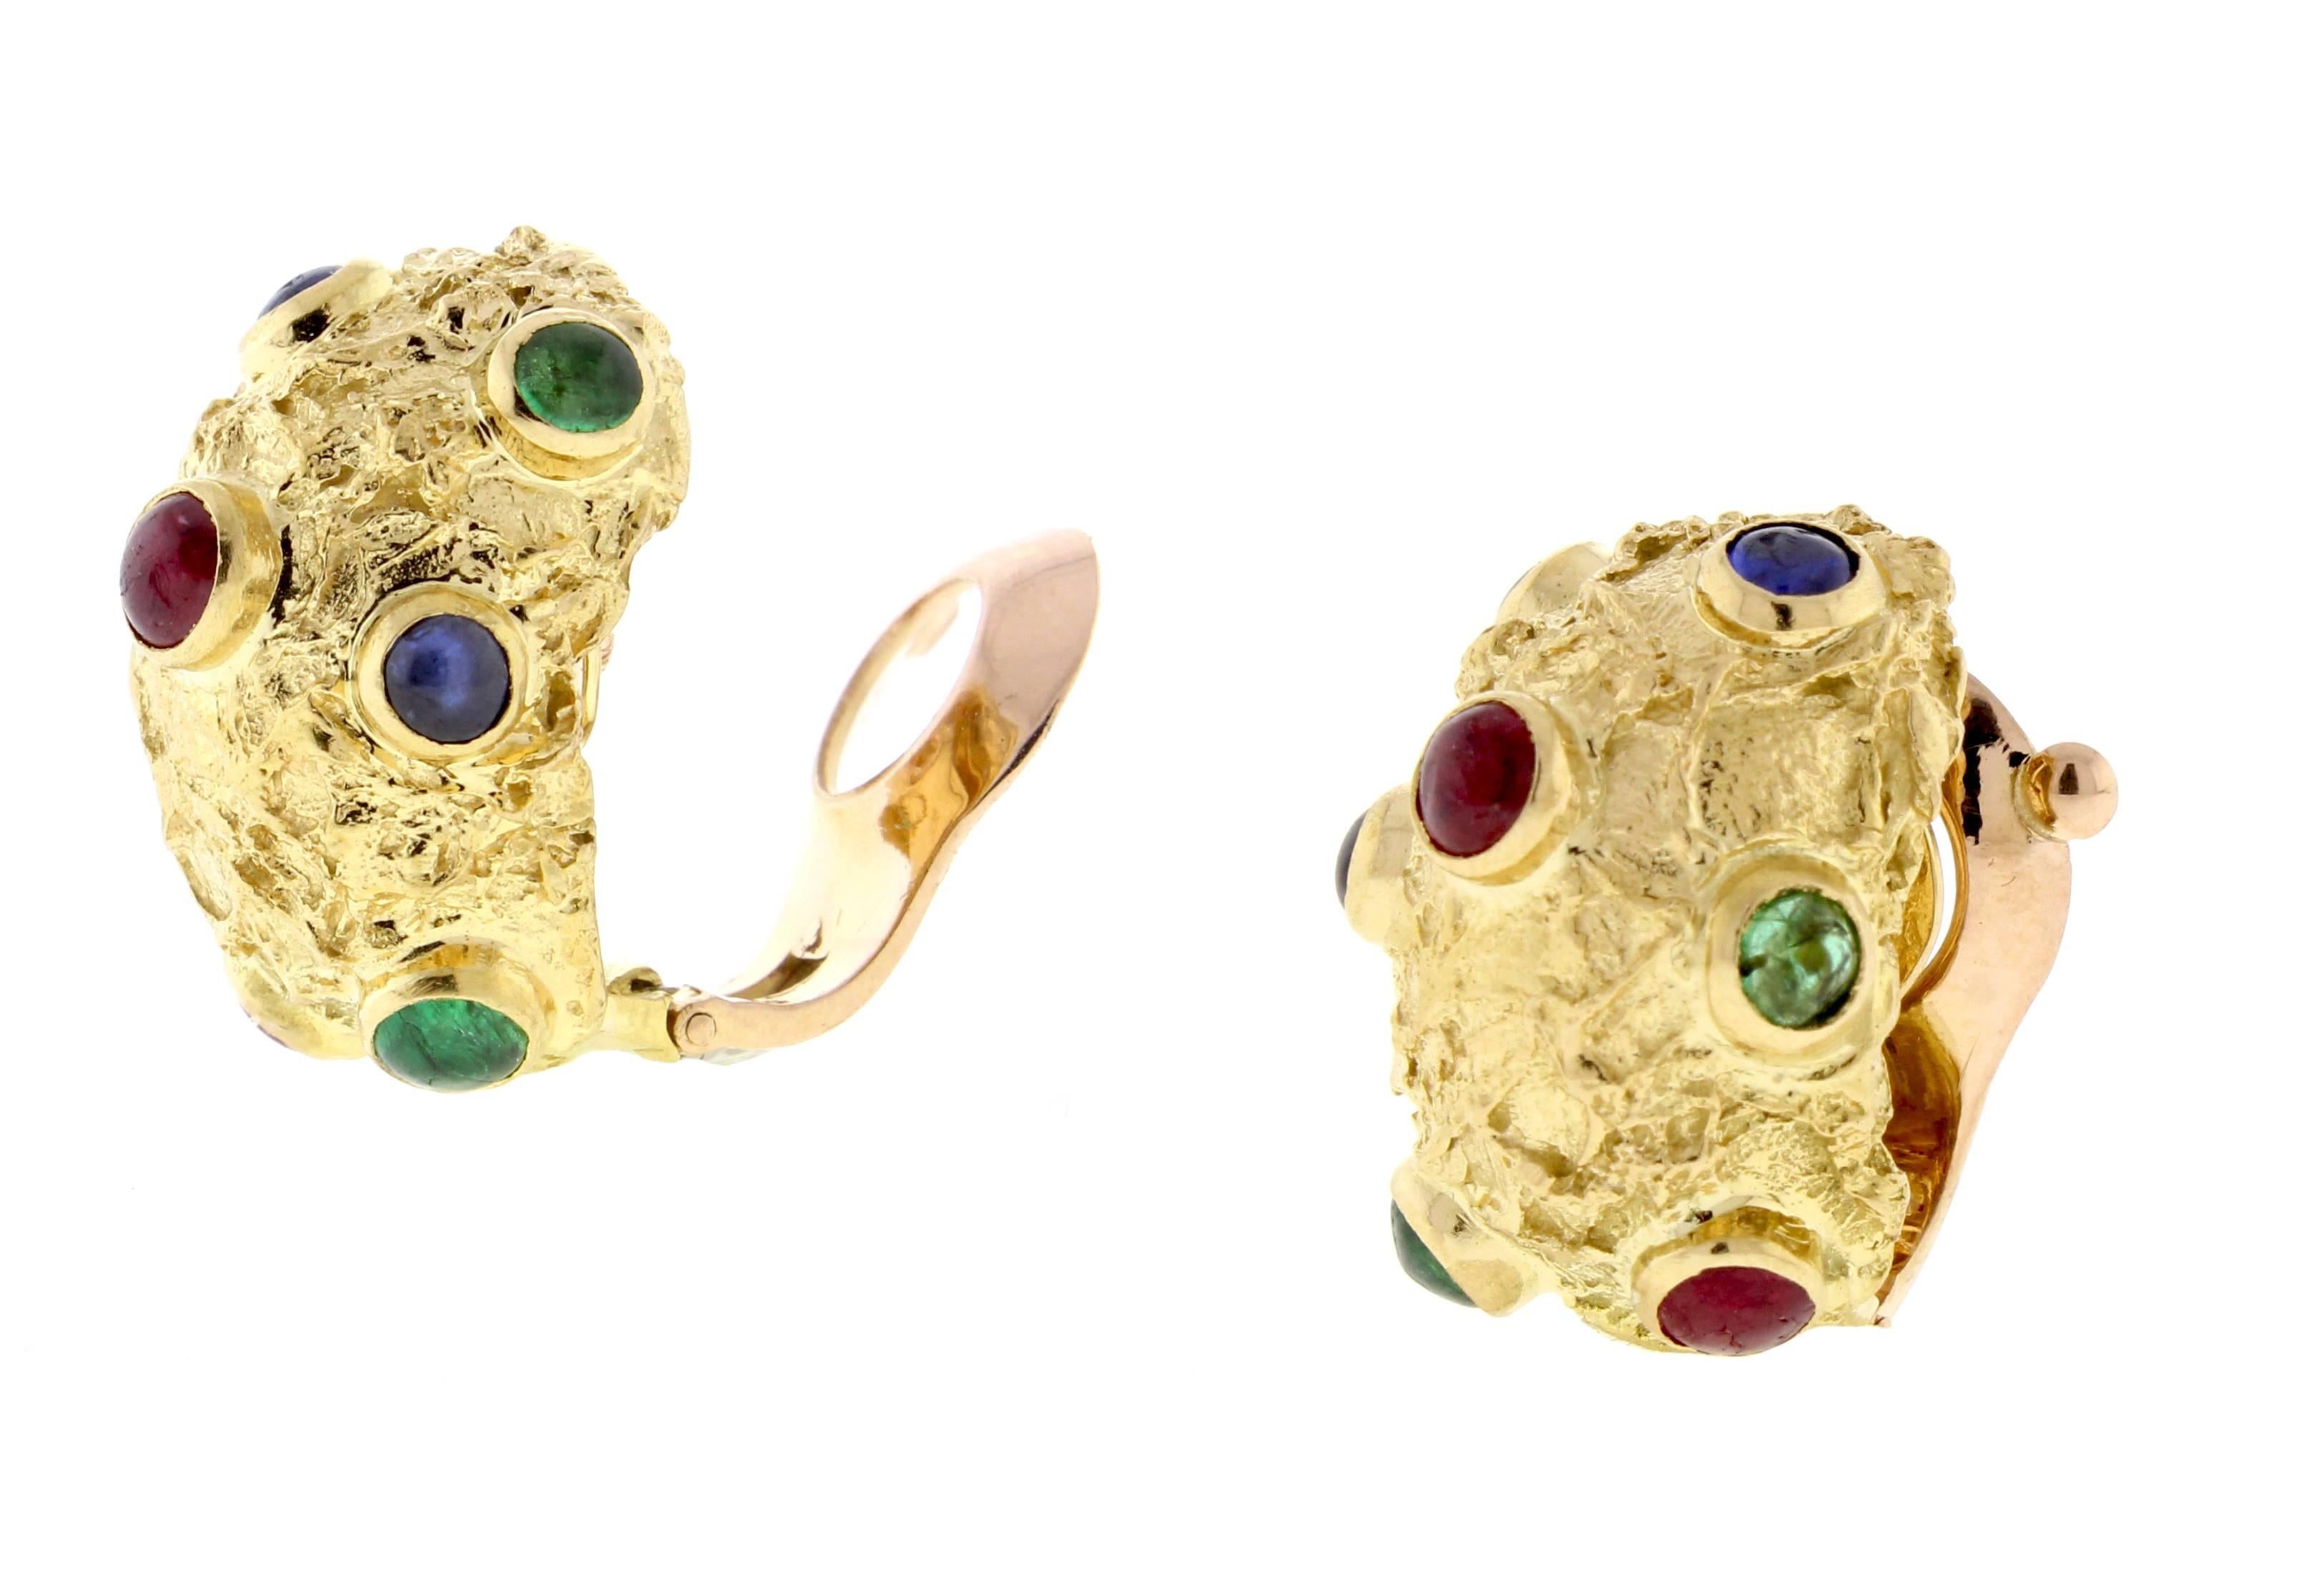 From Van Cleef and Arpels, a pair of textured  18 karat gold hoop earrings set the cabochon rubies, sapphires and emeralds. The hoops measure 5/8 of an inch across and 7/8 high, 16.7 grams. Signed and numbered, made in France